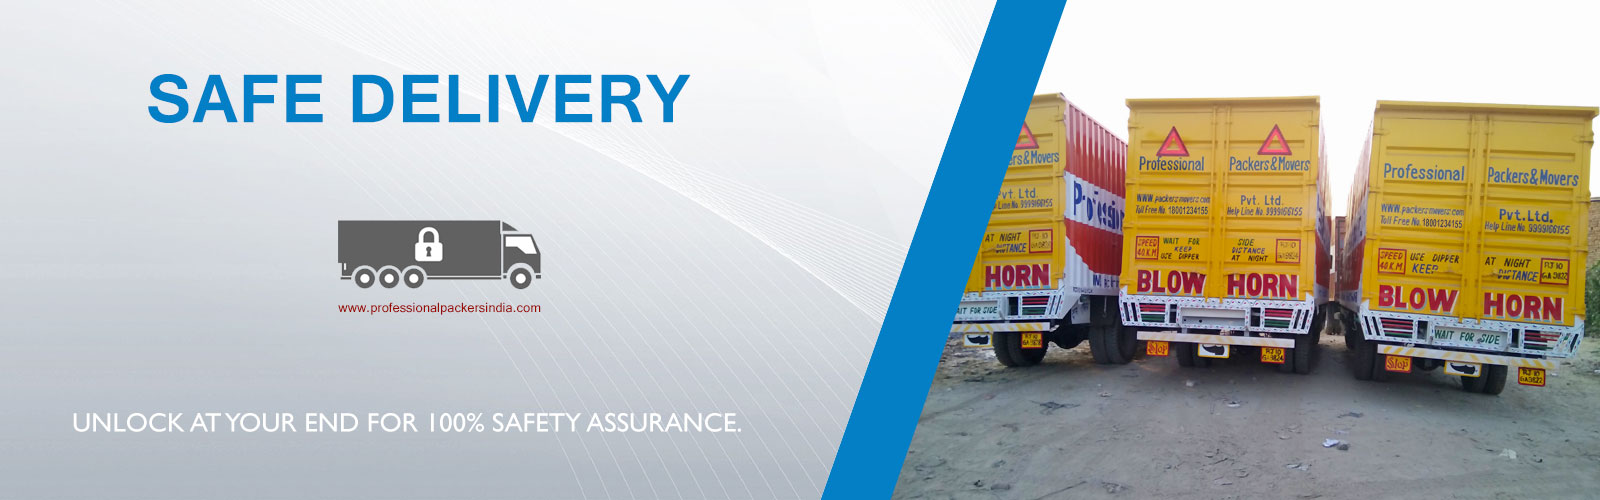 Movers Packers Jhandewalan Delhi company move your belongings fast and in an efficient manner by integrating top-notch packaging material, dedicated staff and global-class technology.